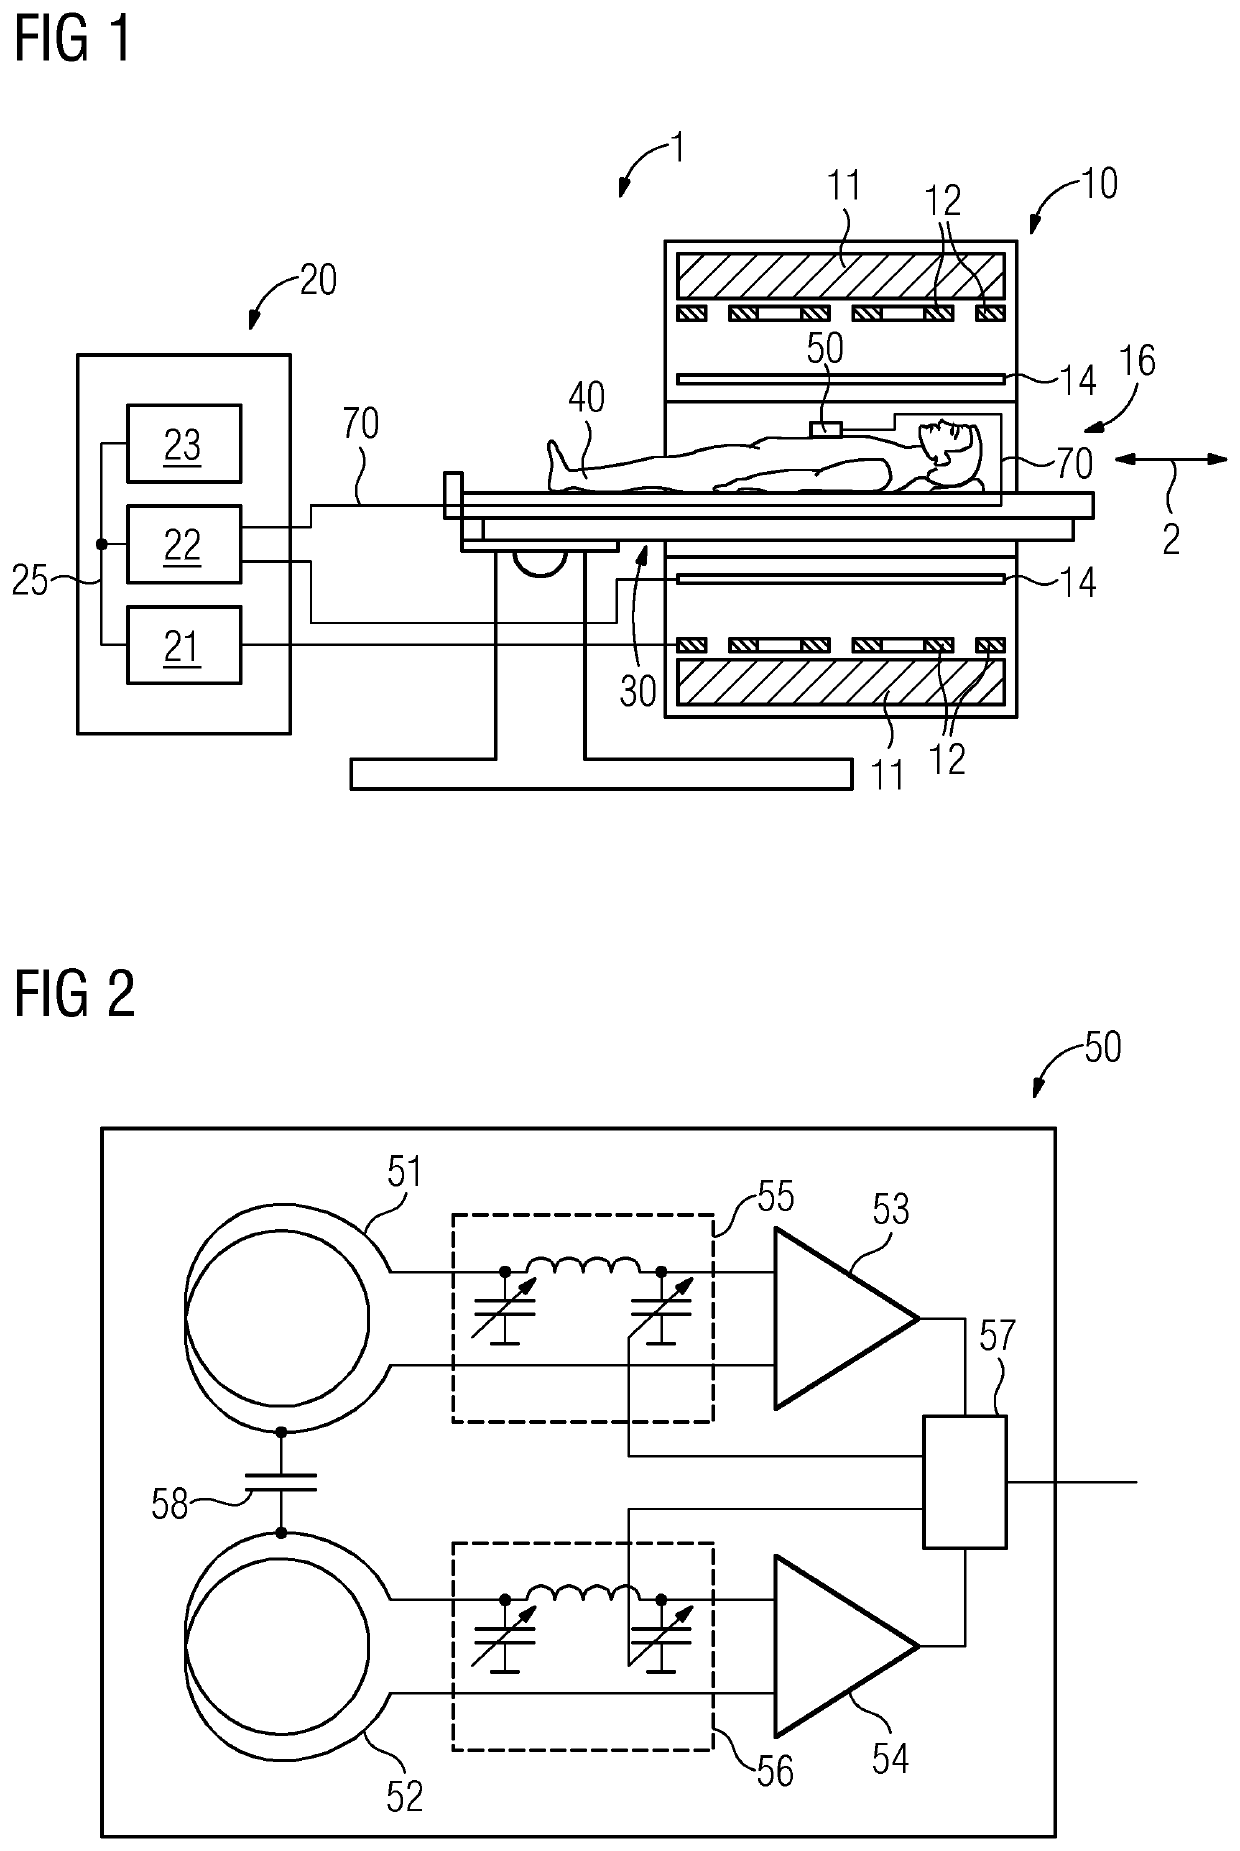 Magnetic resonance scanner and local coil matrix for operation at low magnetic field strengths